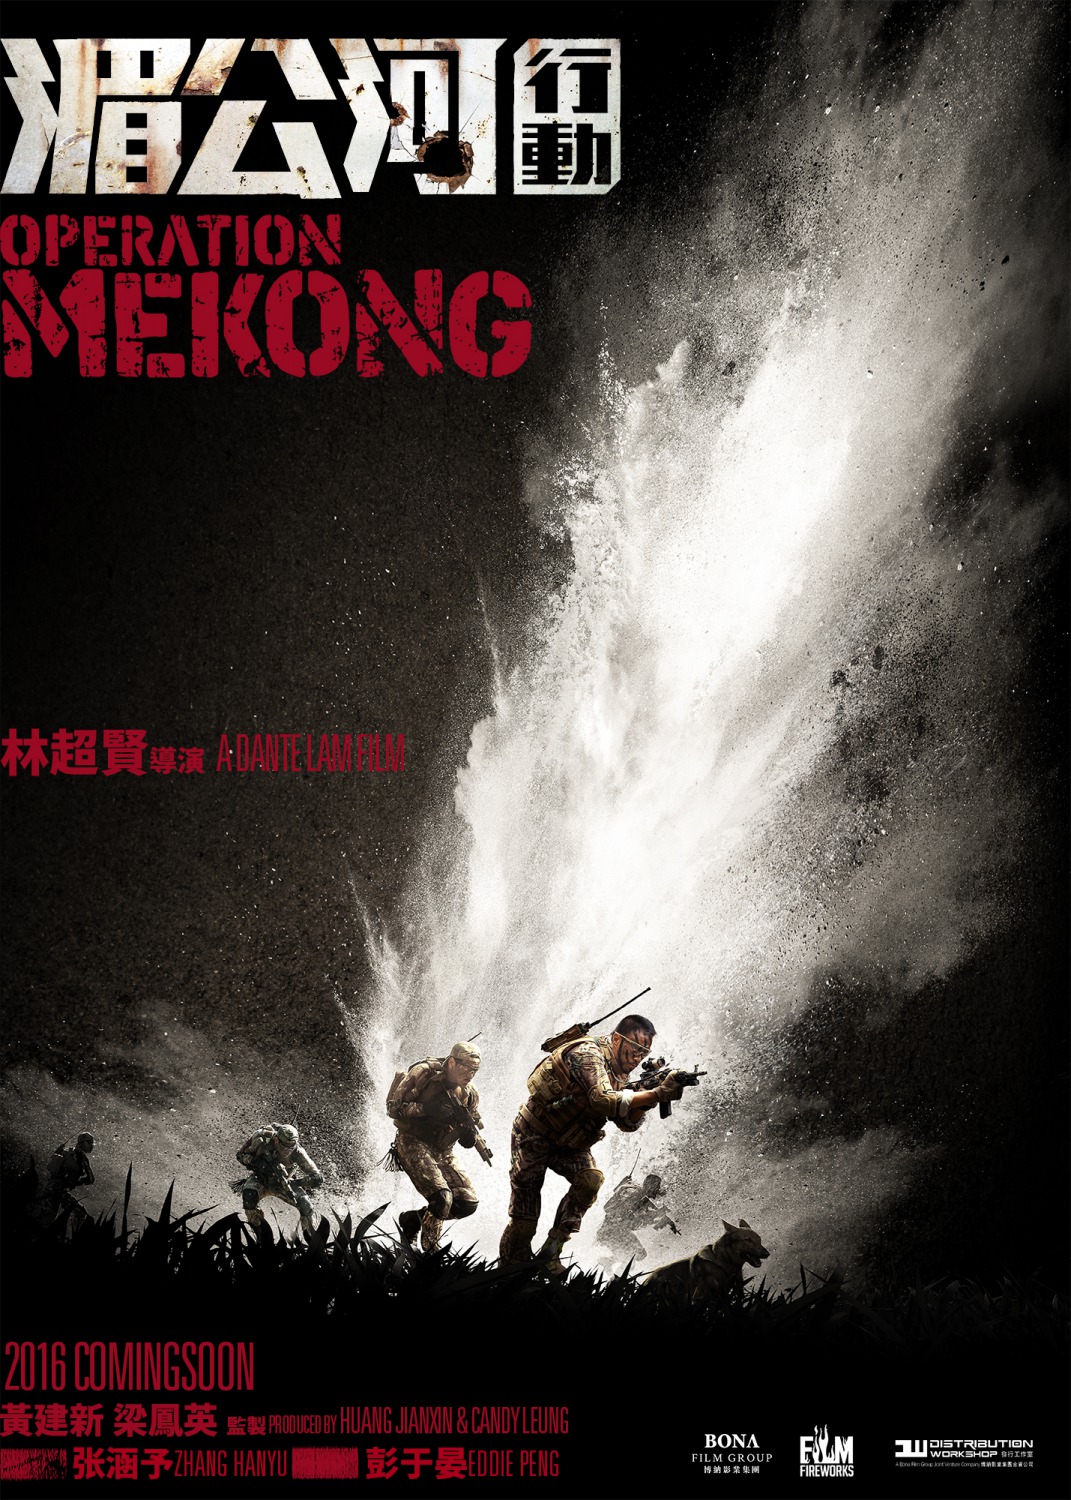 Extra Large Movie Poster Image for Mei Gong he xing dong (#8 of 8)